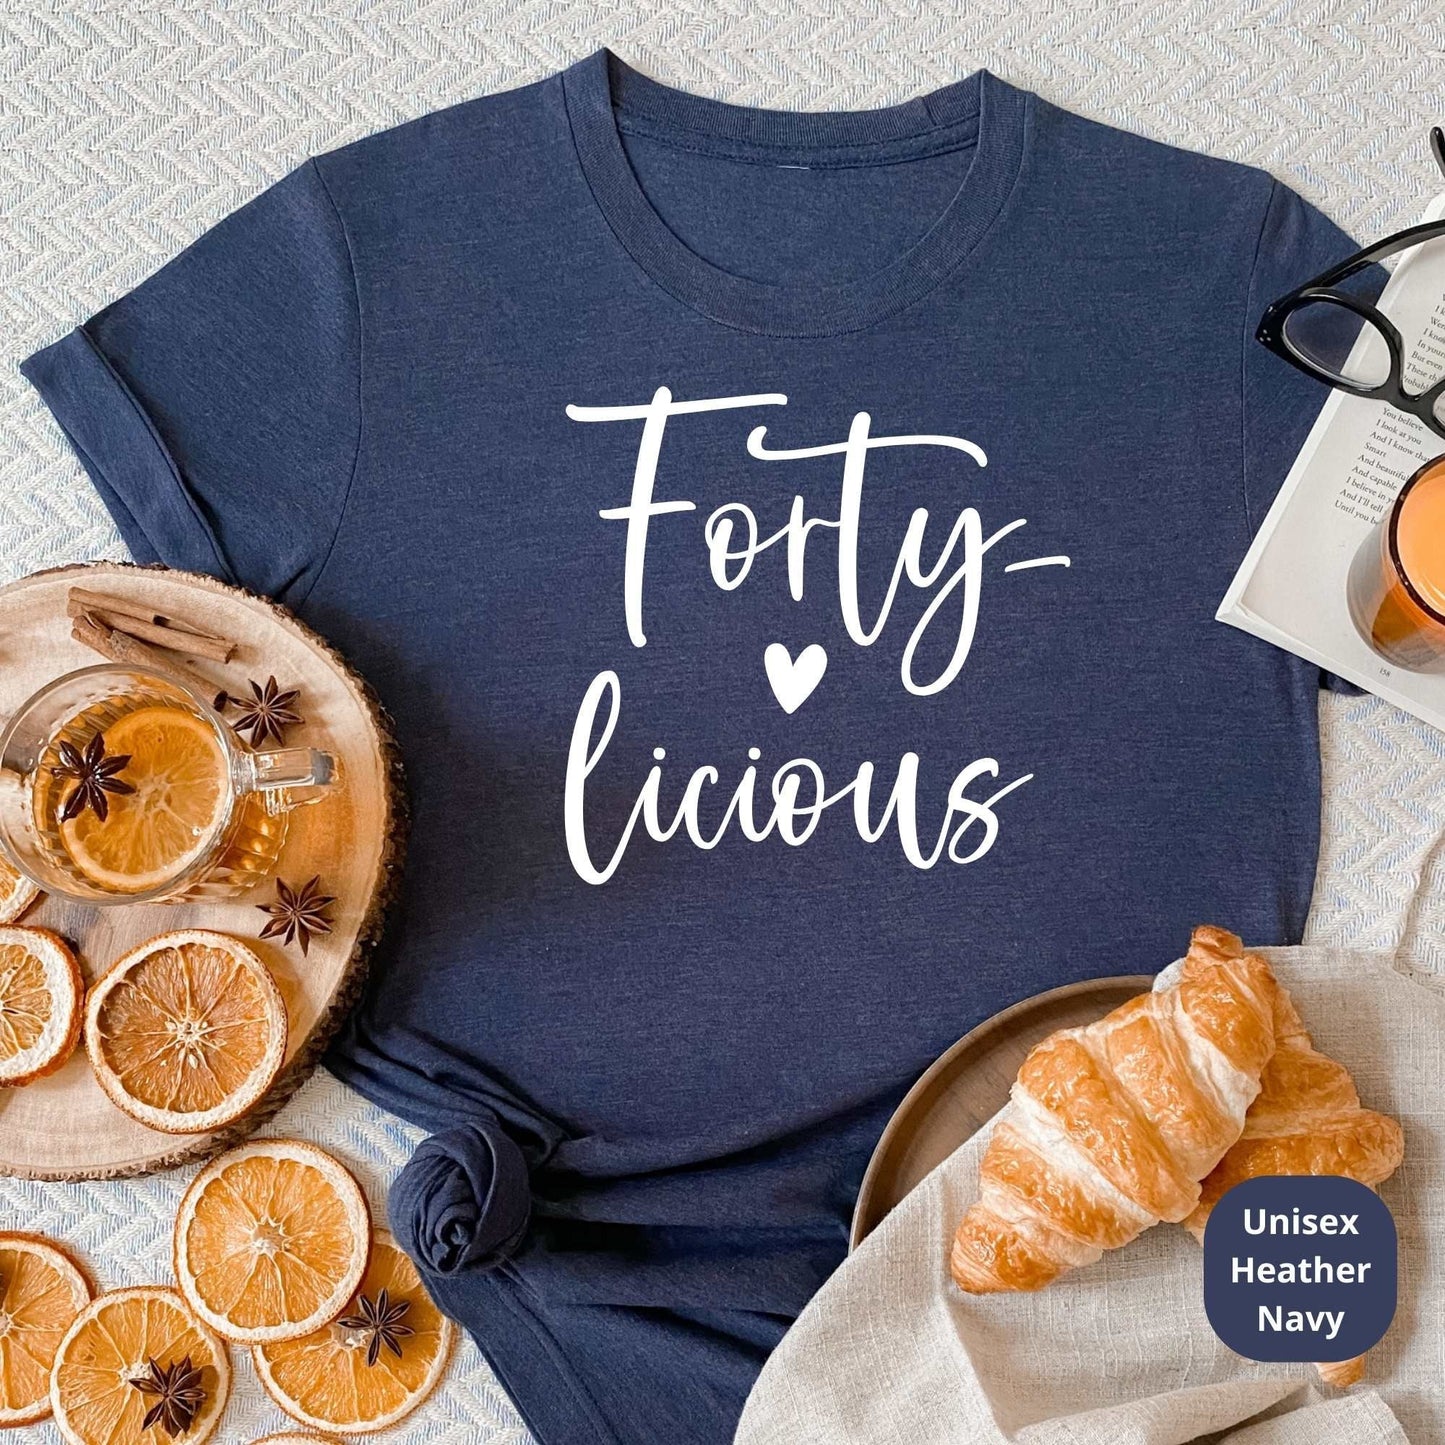 Forty-Licioius & Forty-Licious Squad, 40th Birthday Party Shirts HMDesignStudioUS